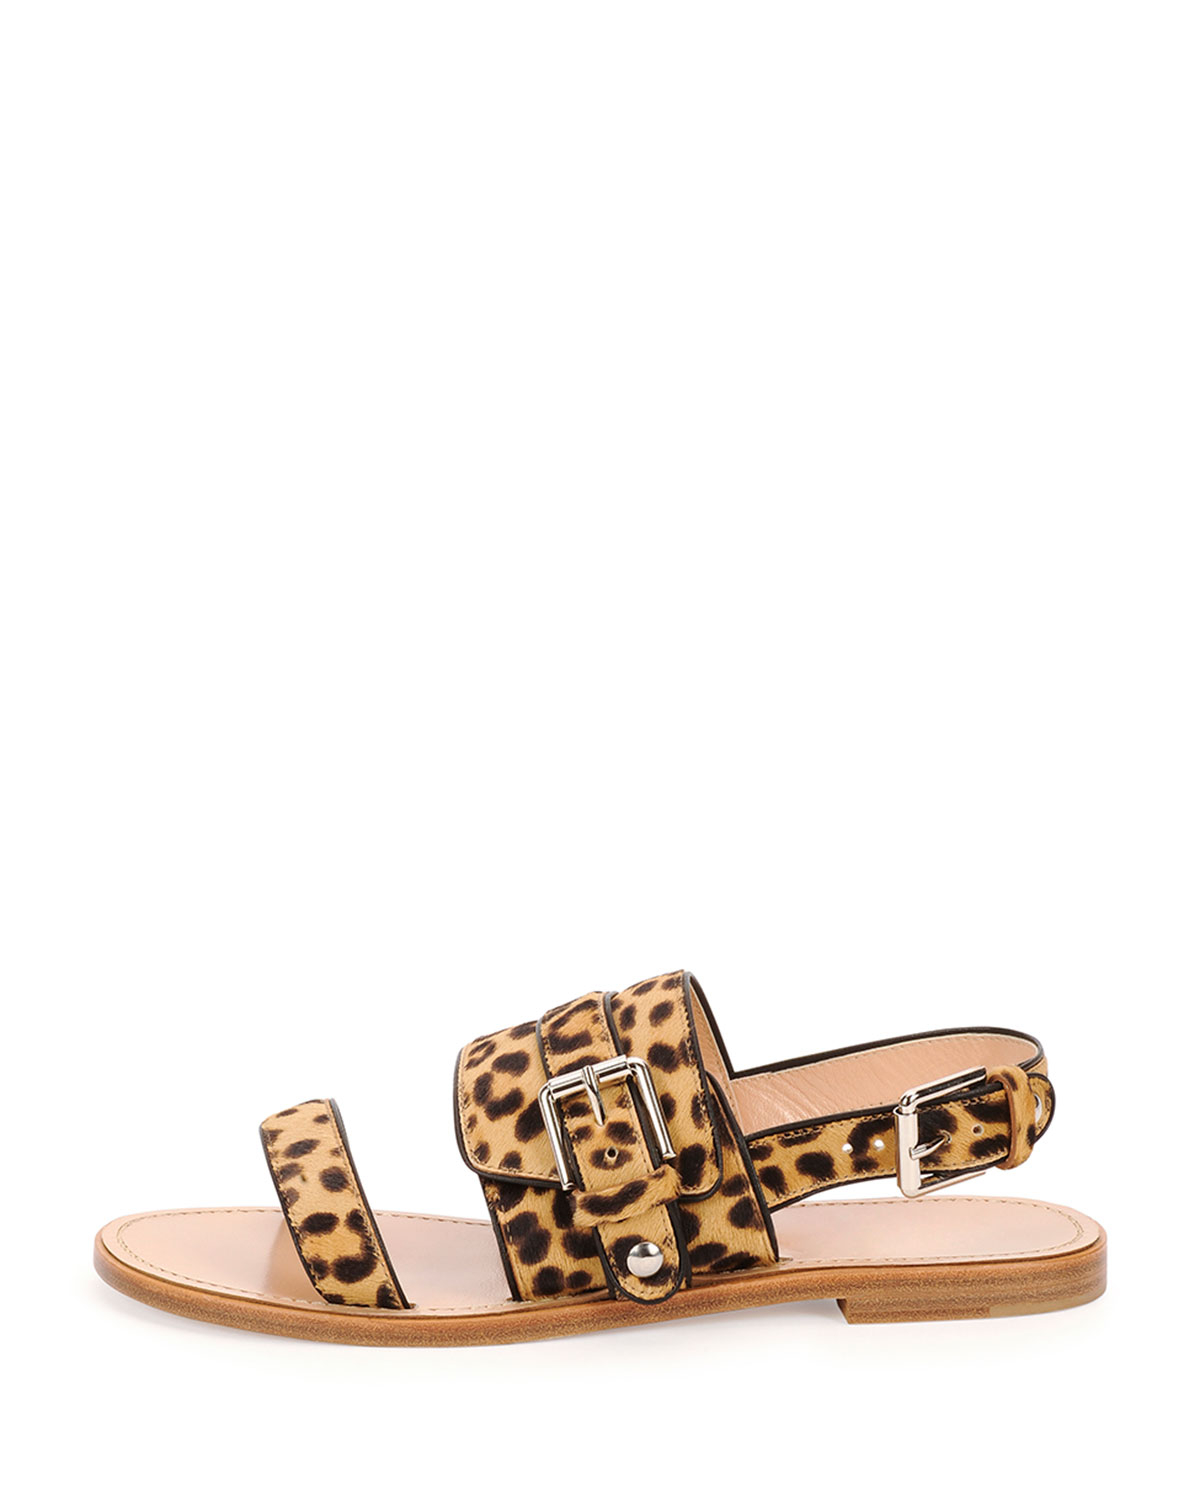 Lyst - Gianvito Rossi Double-Band Leopard-Print Flat Sandal in Black